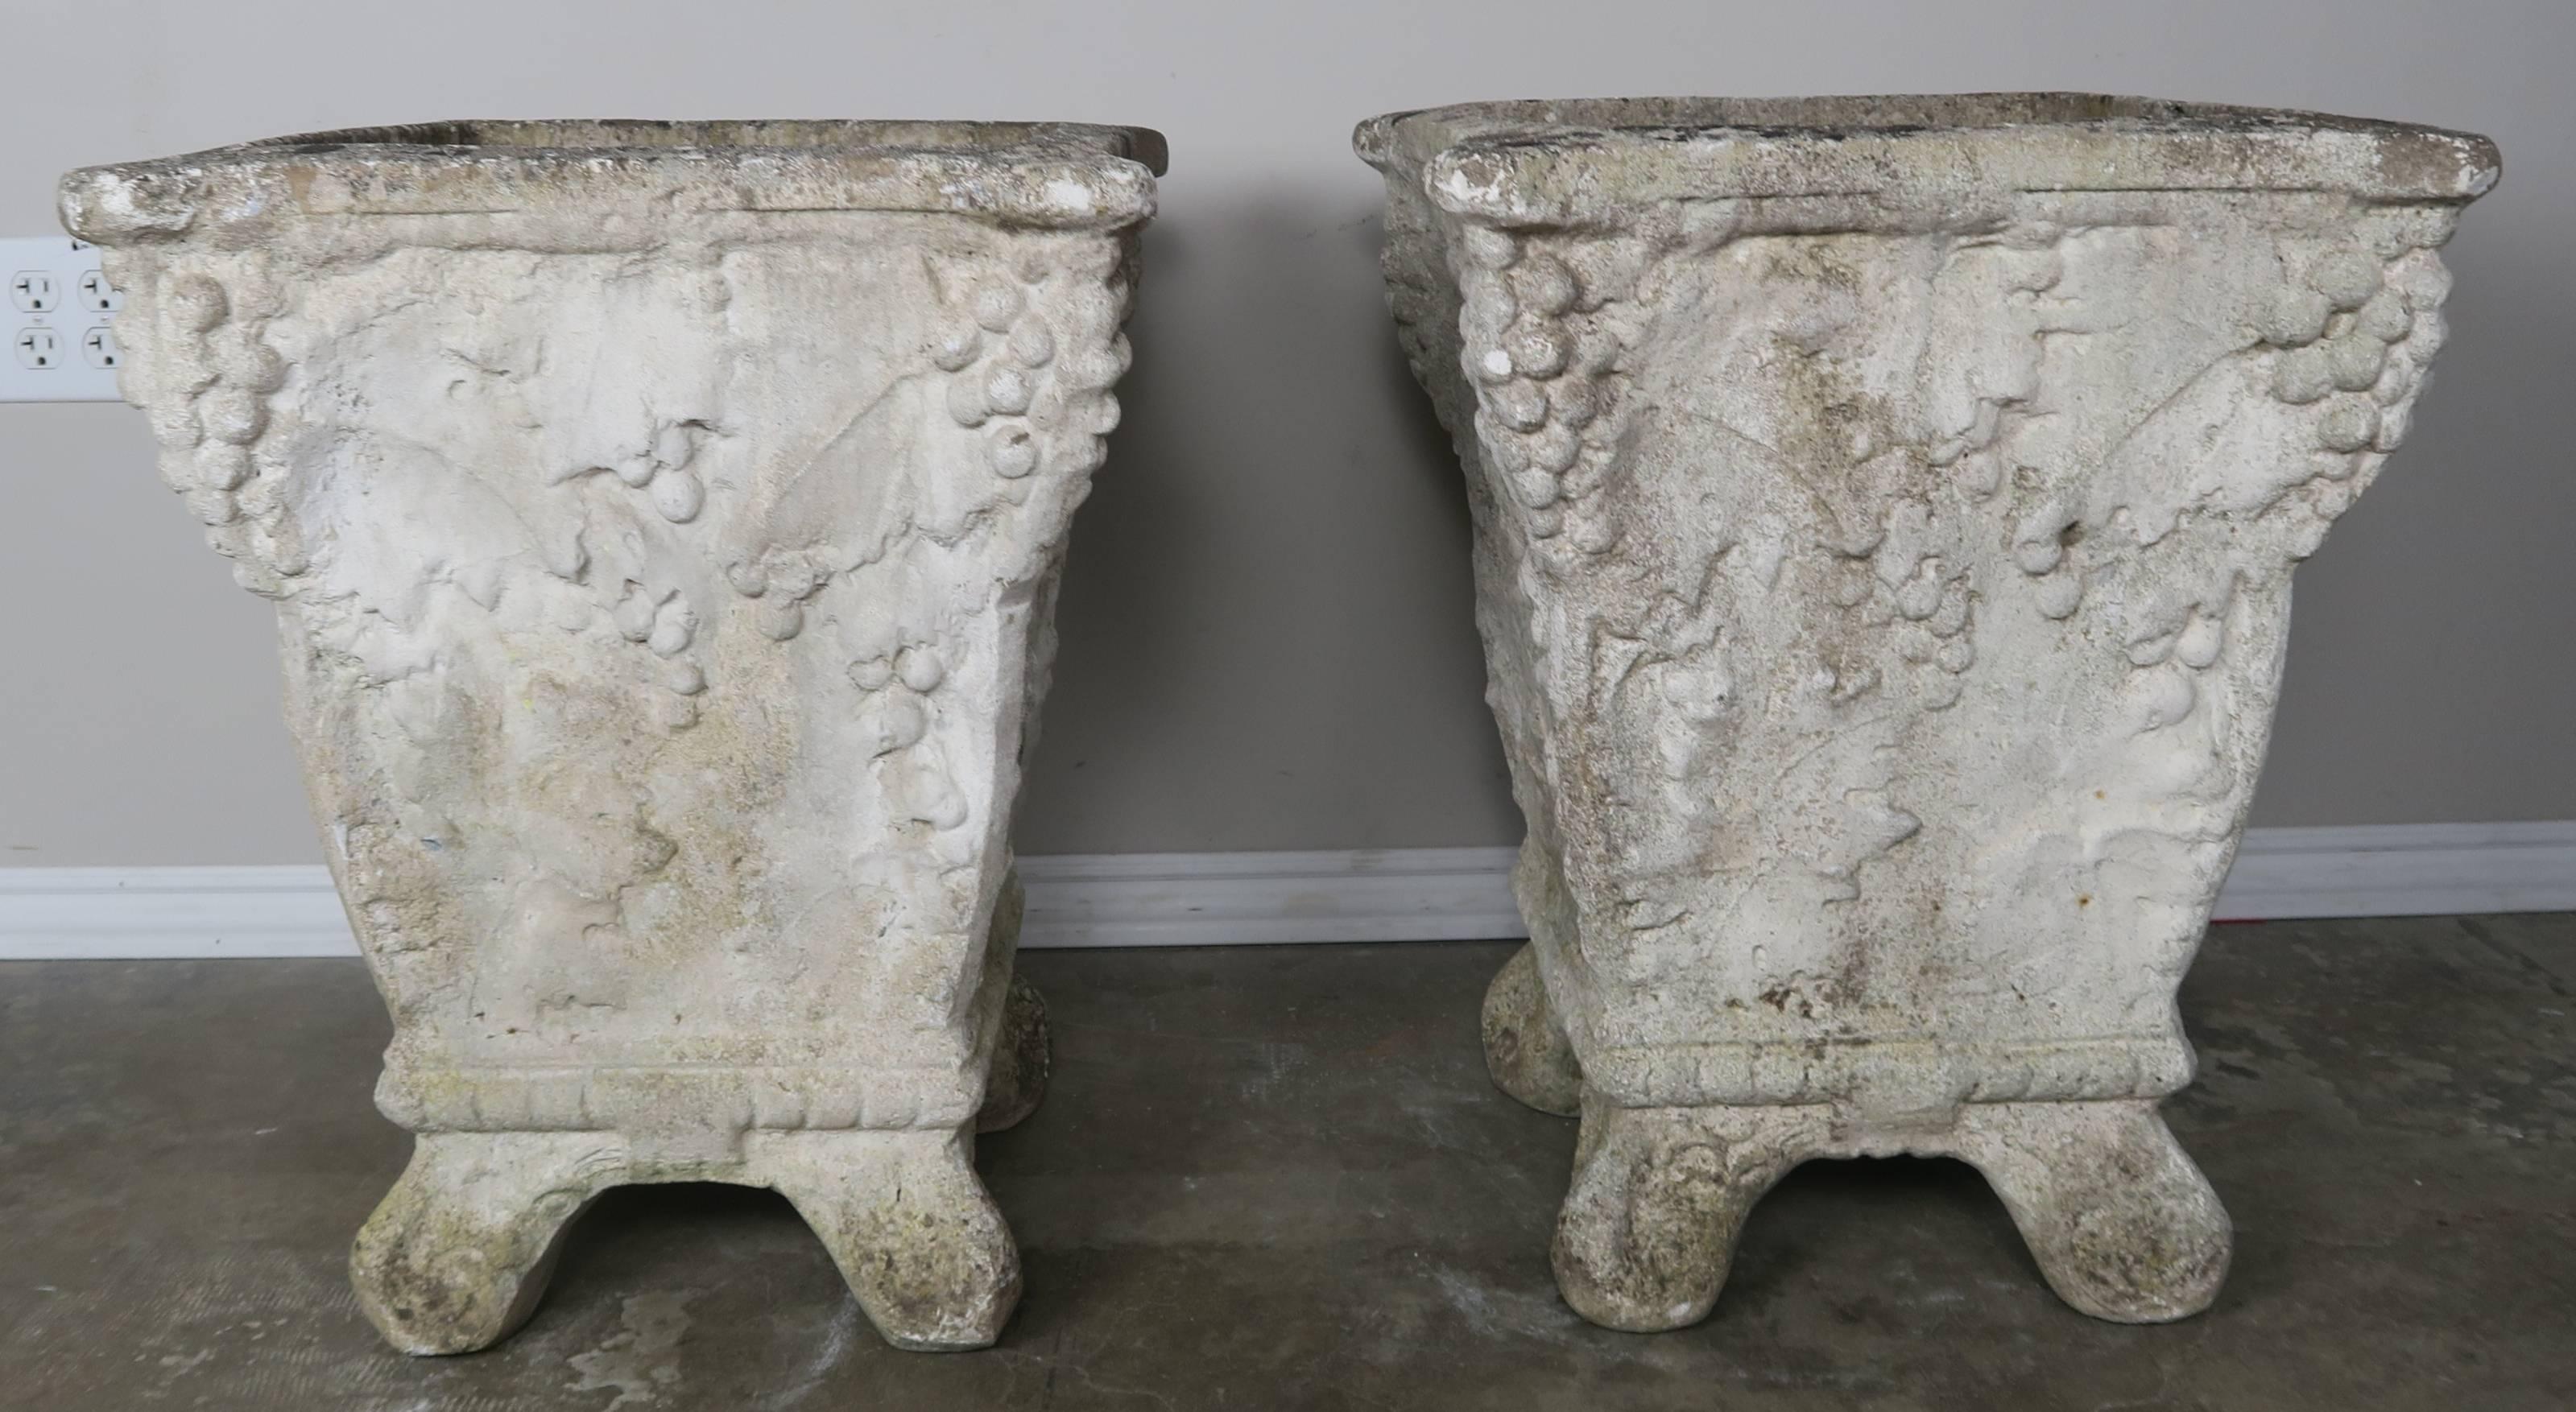 Pair of 1920s cast cement grape motif planters from Belgium. These planters have a rare interesting form and have developed a beautiful patina with some moss discoloration near the bottoms.